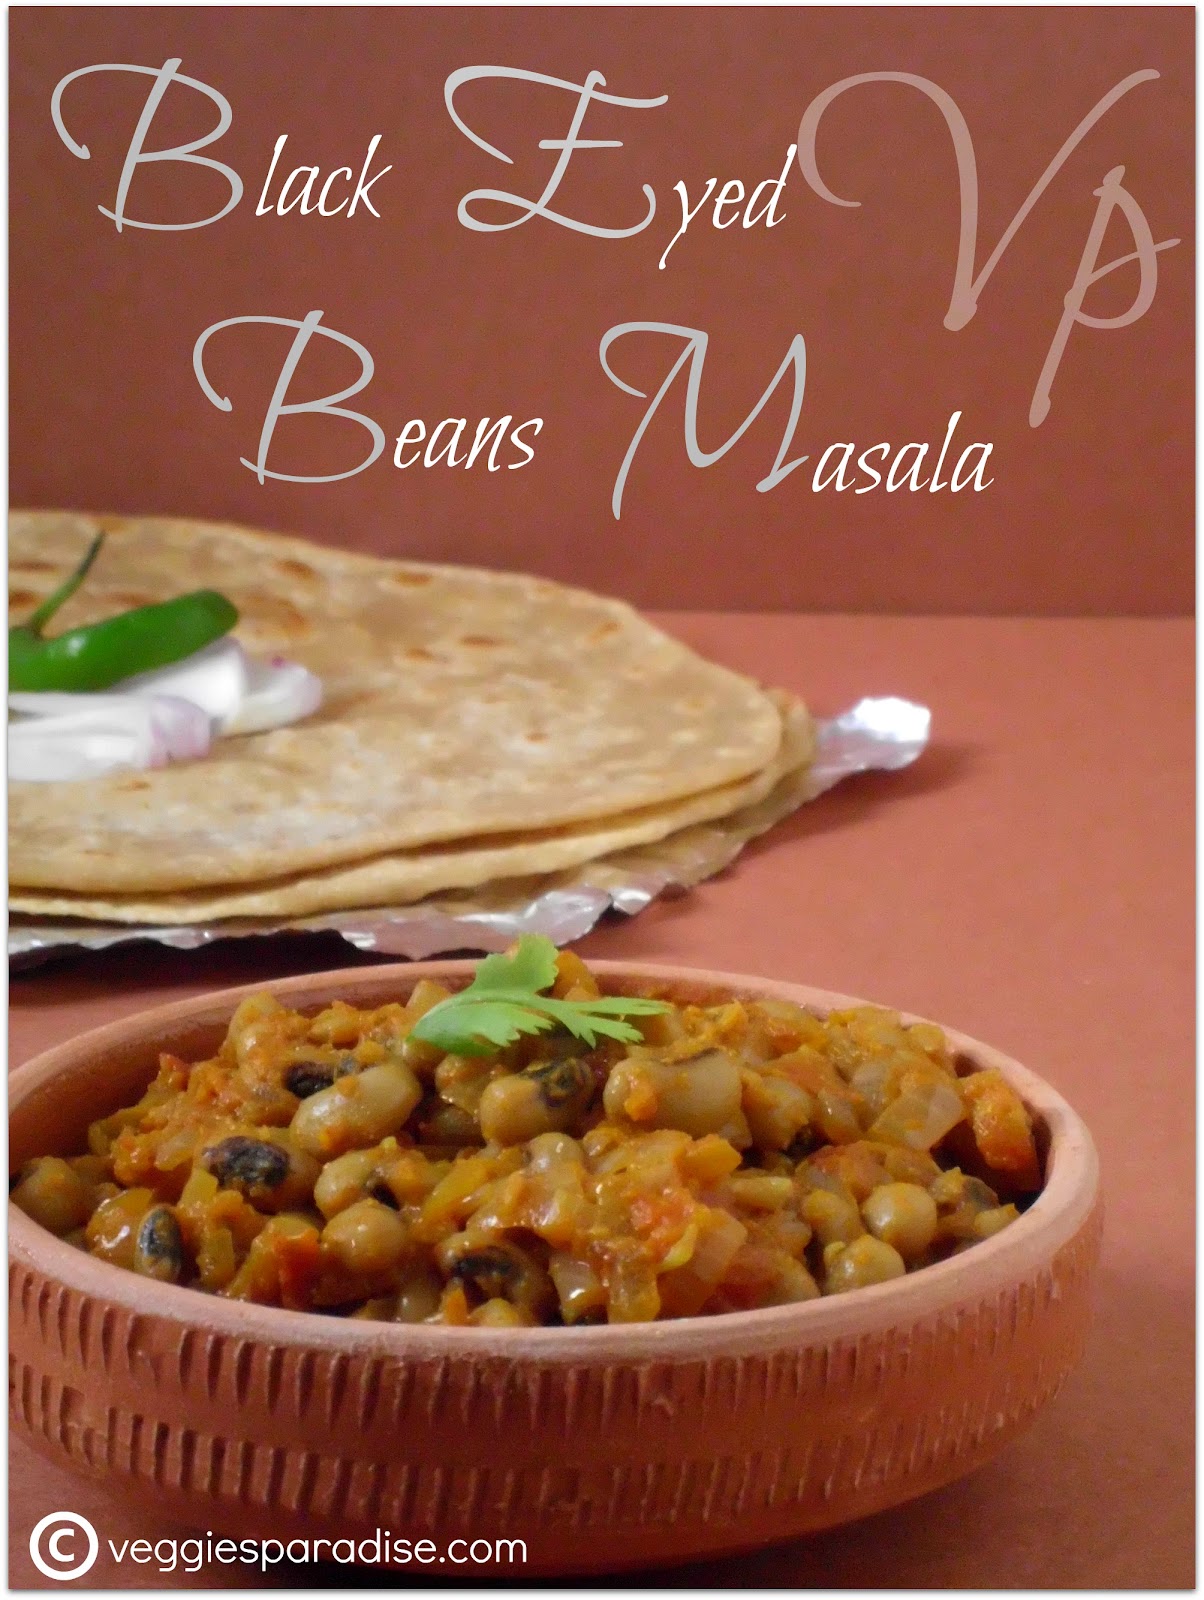 BLACK EYED BEANS CURRY | BLACK EYED BEANS MASALA - STEP BY STEP ...